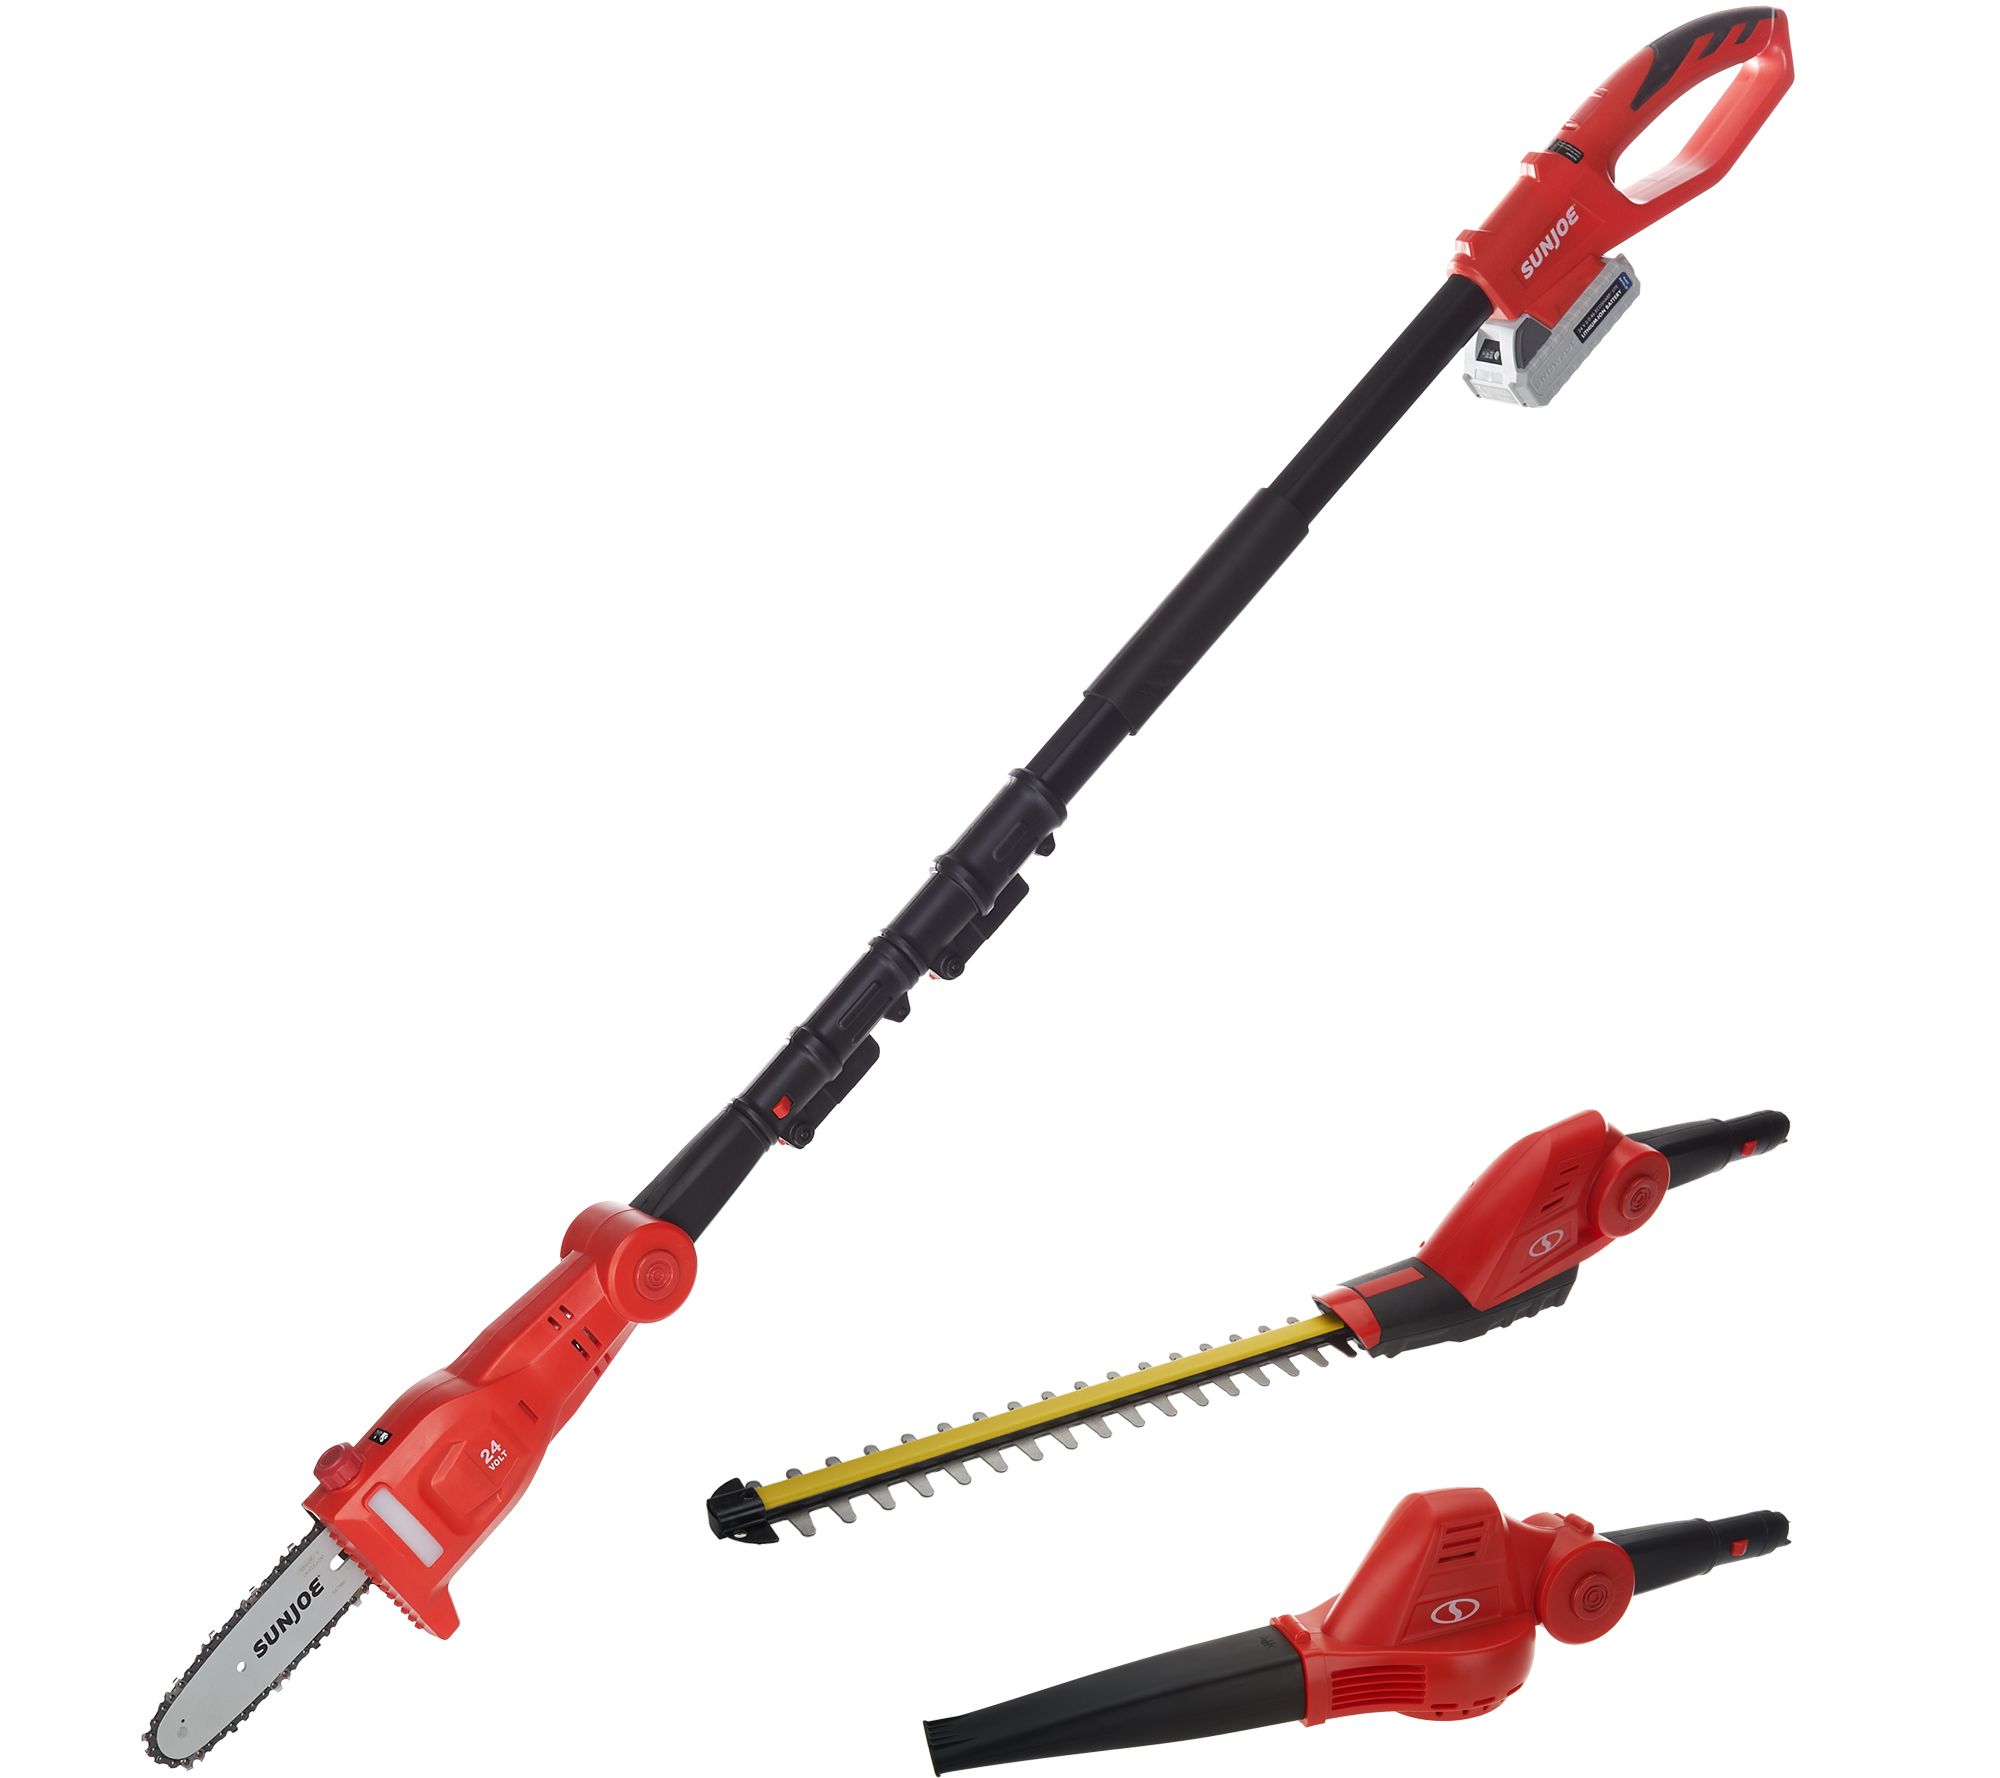 Cordless pole saw and hedge trimmer